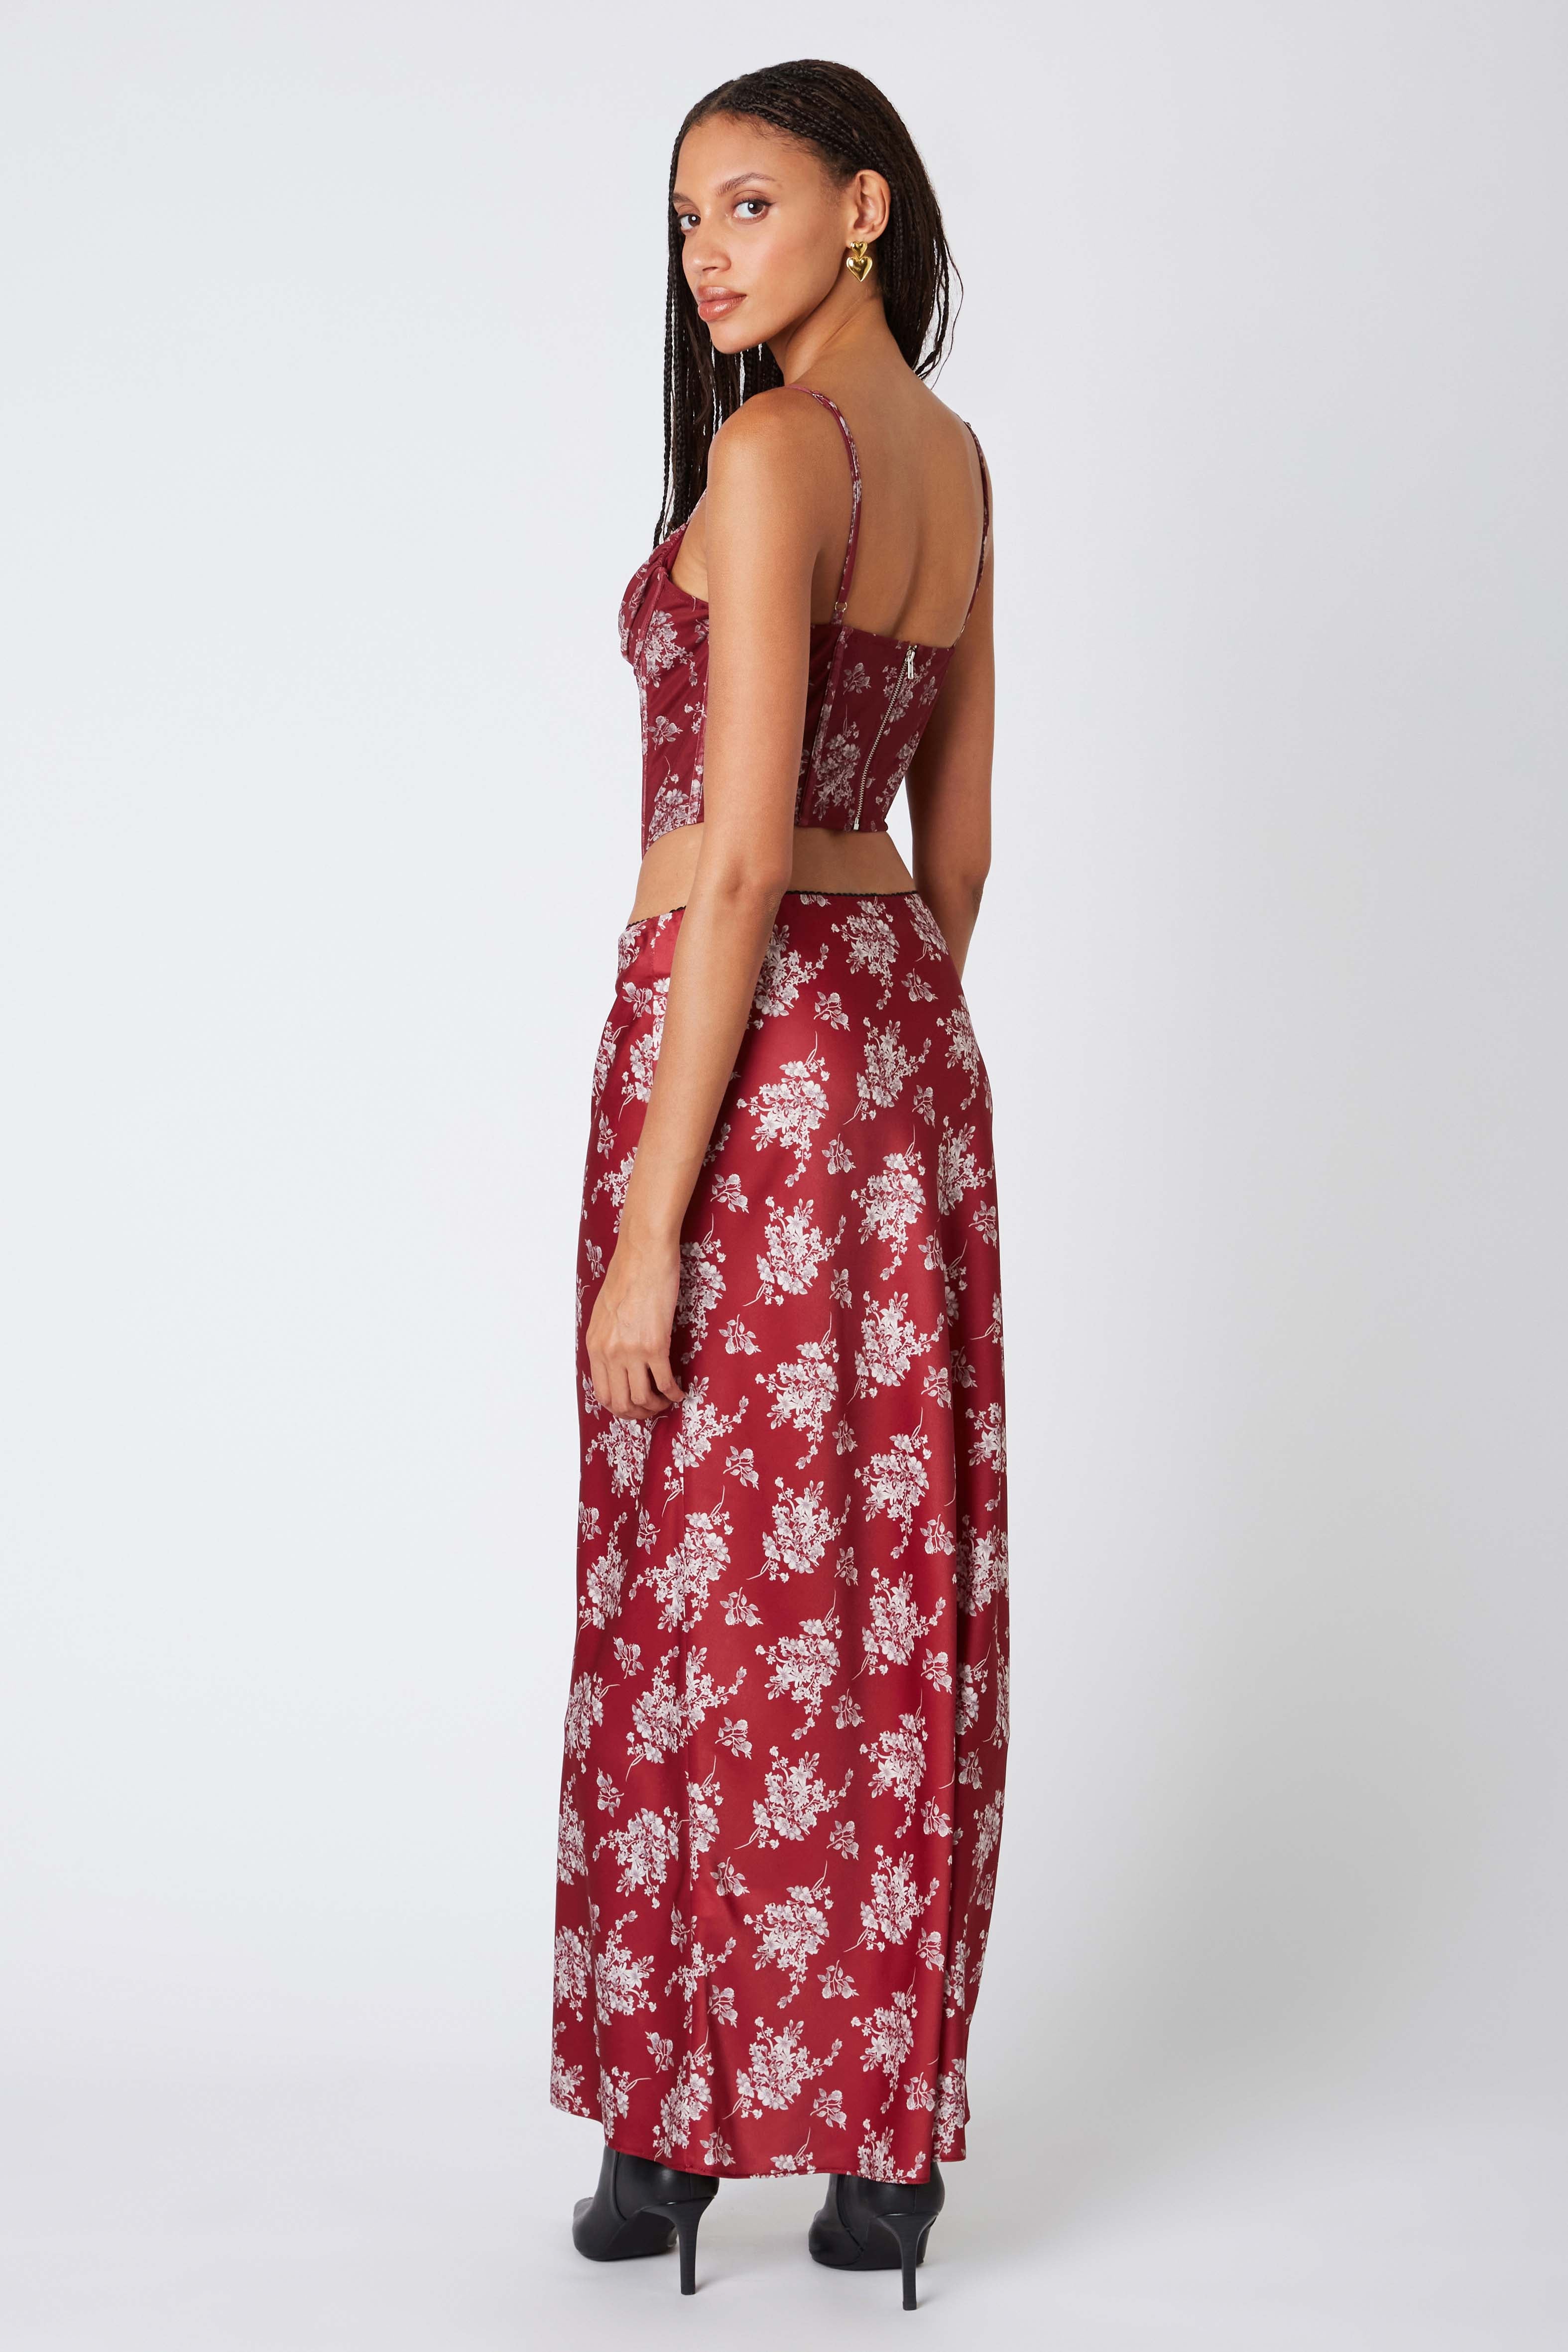 Floral Maxi Skirt in Wine Back View